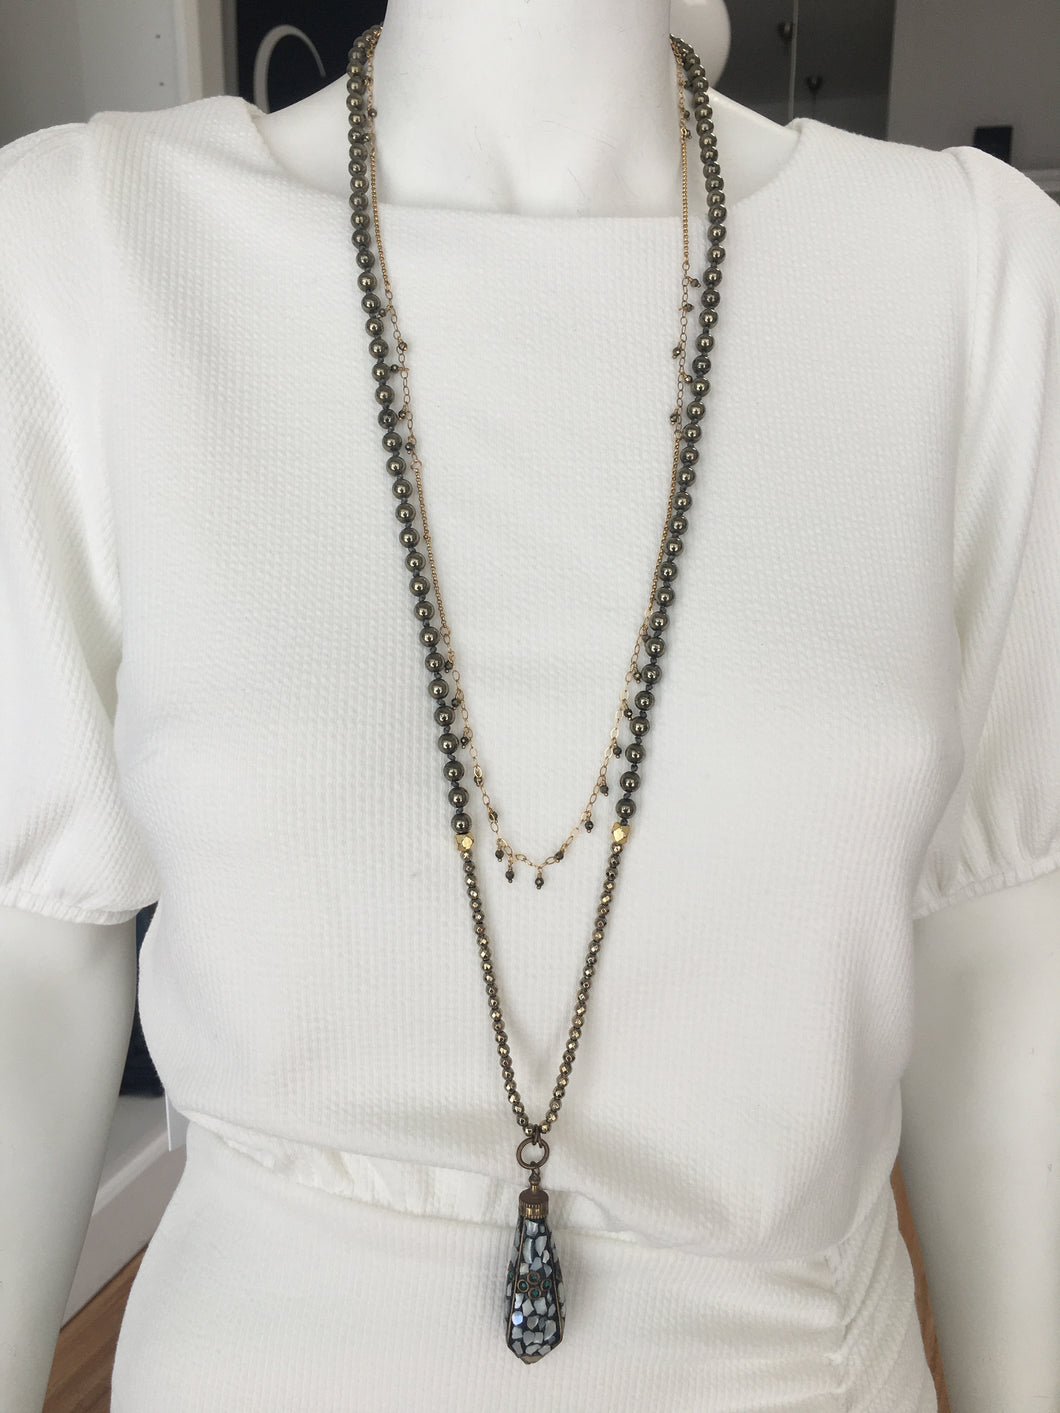 Isabel INY - Pyrite Necklace with Tibetan M.O.P Charm